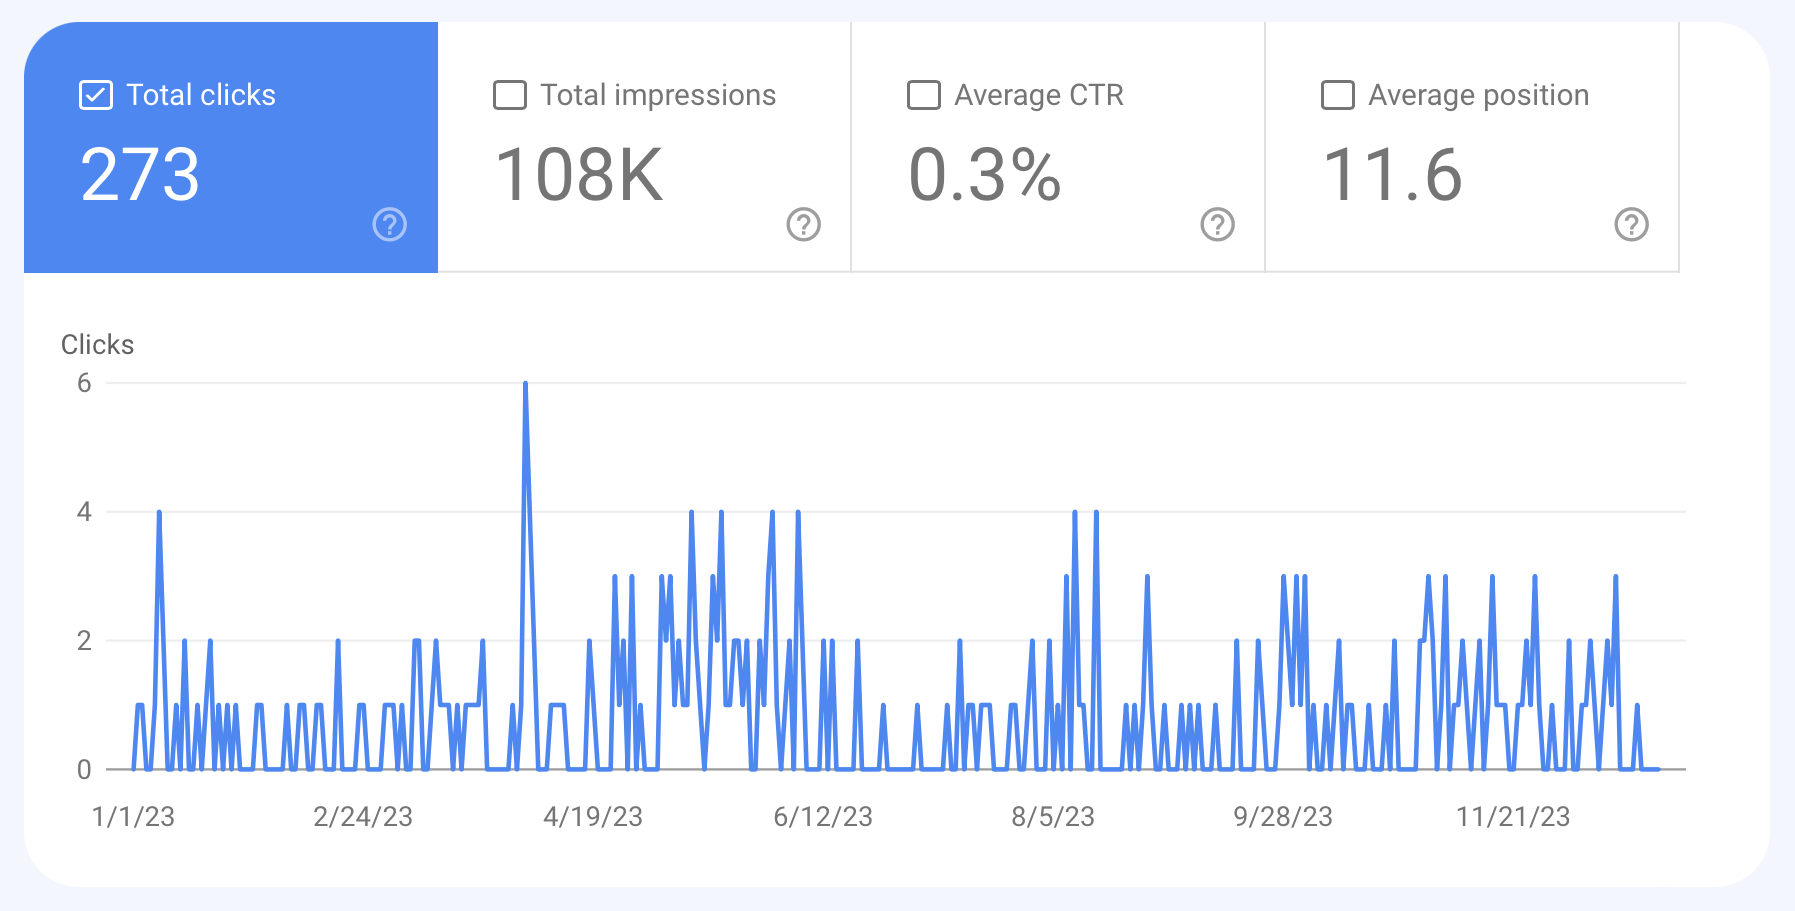 Screenshot of Google Search Console performance metrics showing total clicks, total impressions, average CTR (click-through rate), and average position for a website over the course of a year, with a line graph depicting fluctuations in clicks